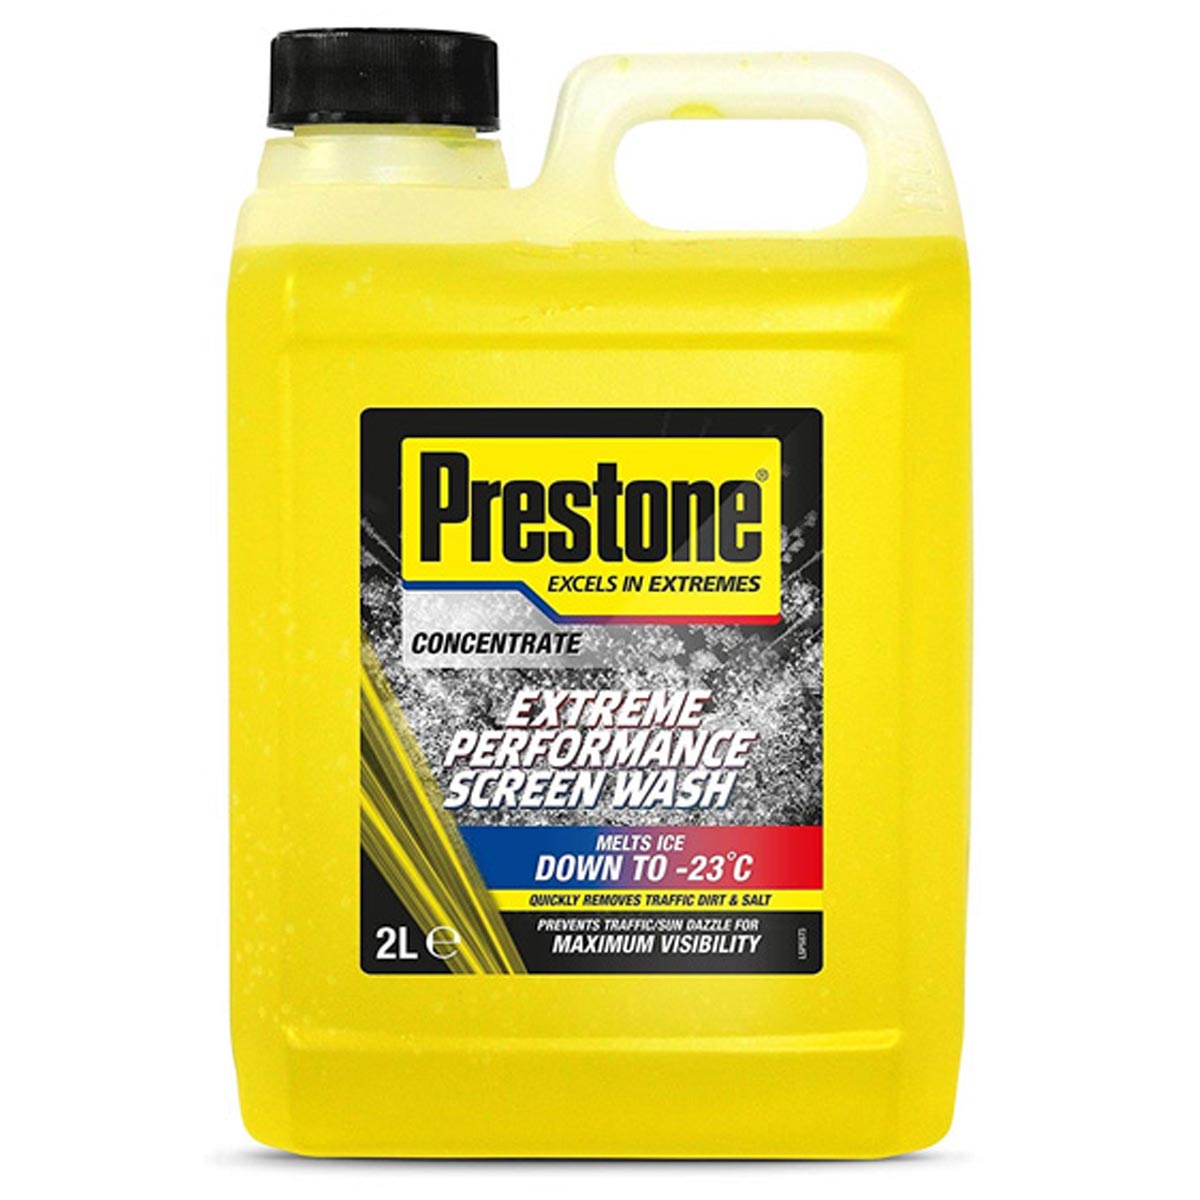 Prestone Screen-wash & De-icer Freeze-proof -18C - 2L Concentrate: Winter Screen Washer Fluid: 2 litre concentrate for extreme, freeze-proof performance even below 0C degrees